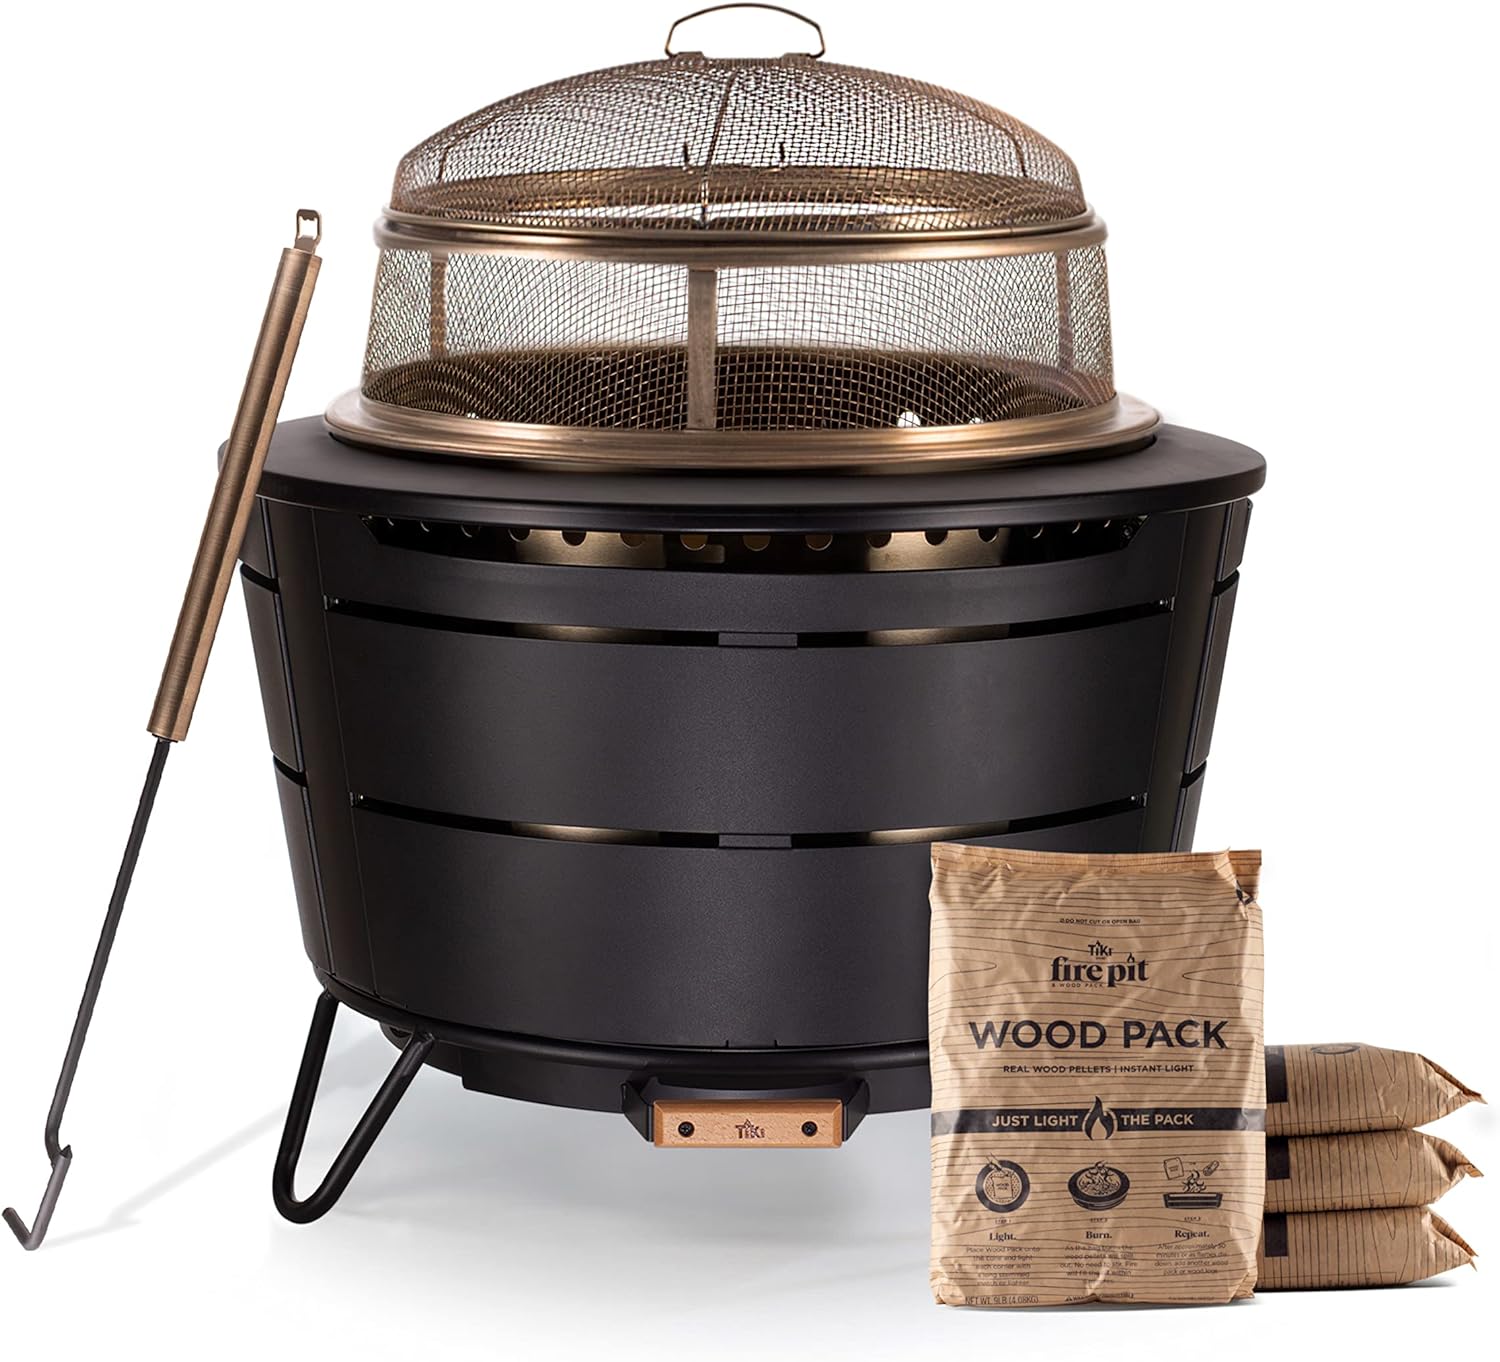 Love love love this firepit. Lots of room inside for the firewood and it burns hot and smokeless. So glad we purchased this. Definitely recommend this product.